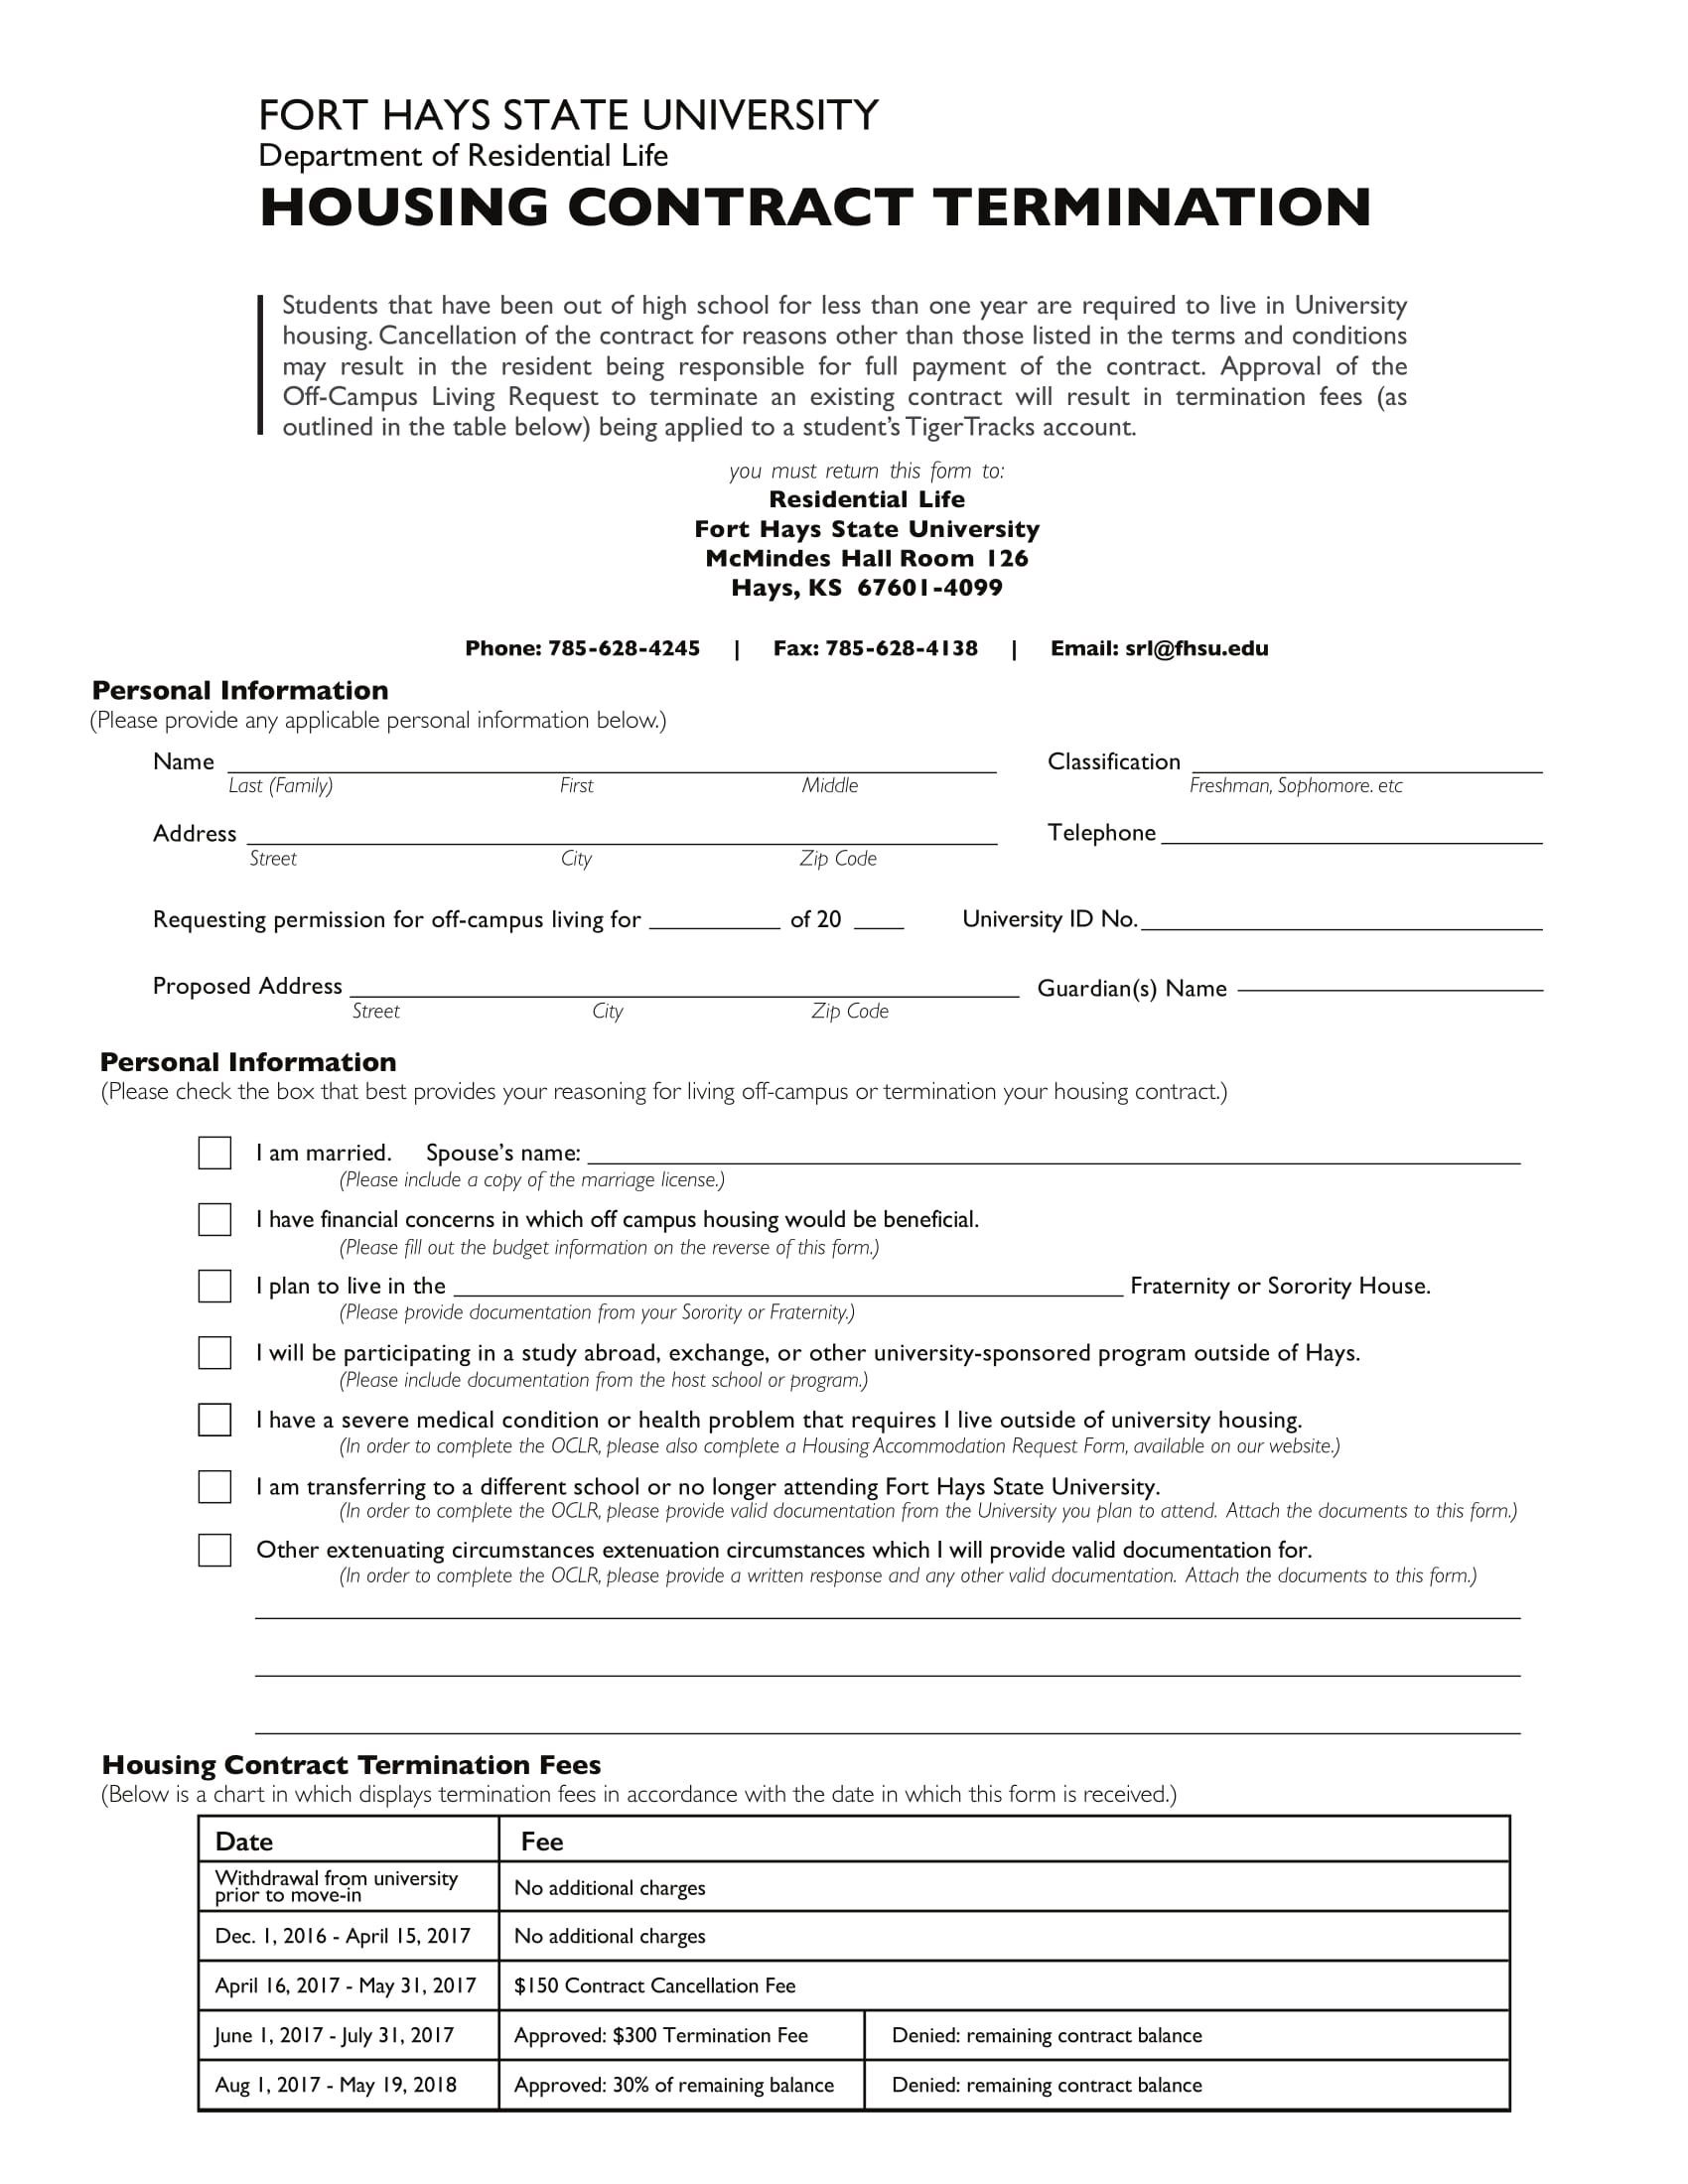 housing contract termination form 1